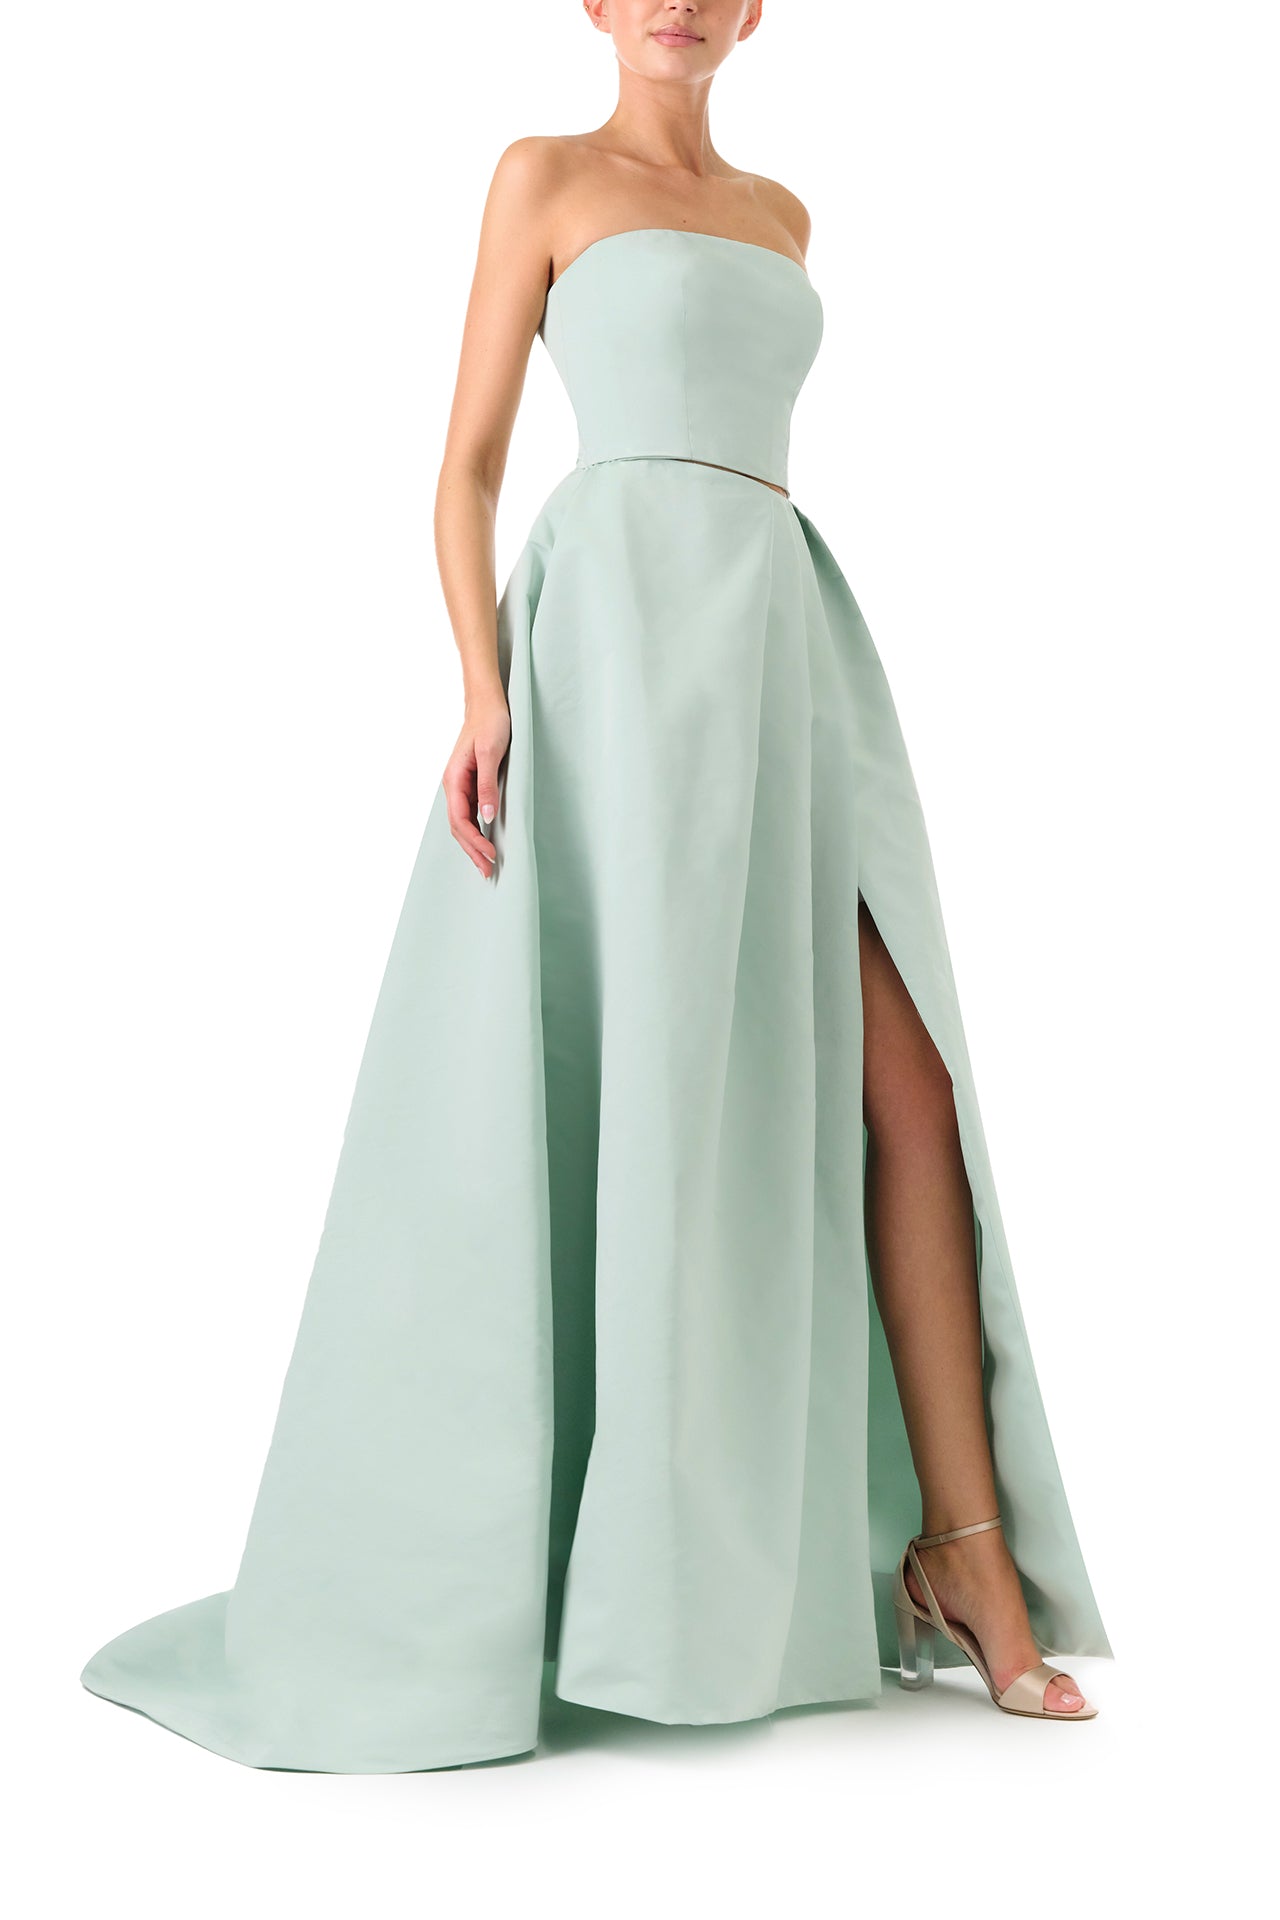 Monique Lhuillier Spring 2023 ball skirt with front slit in pistachio silk faille fabric - right side.